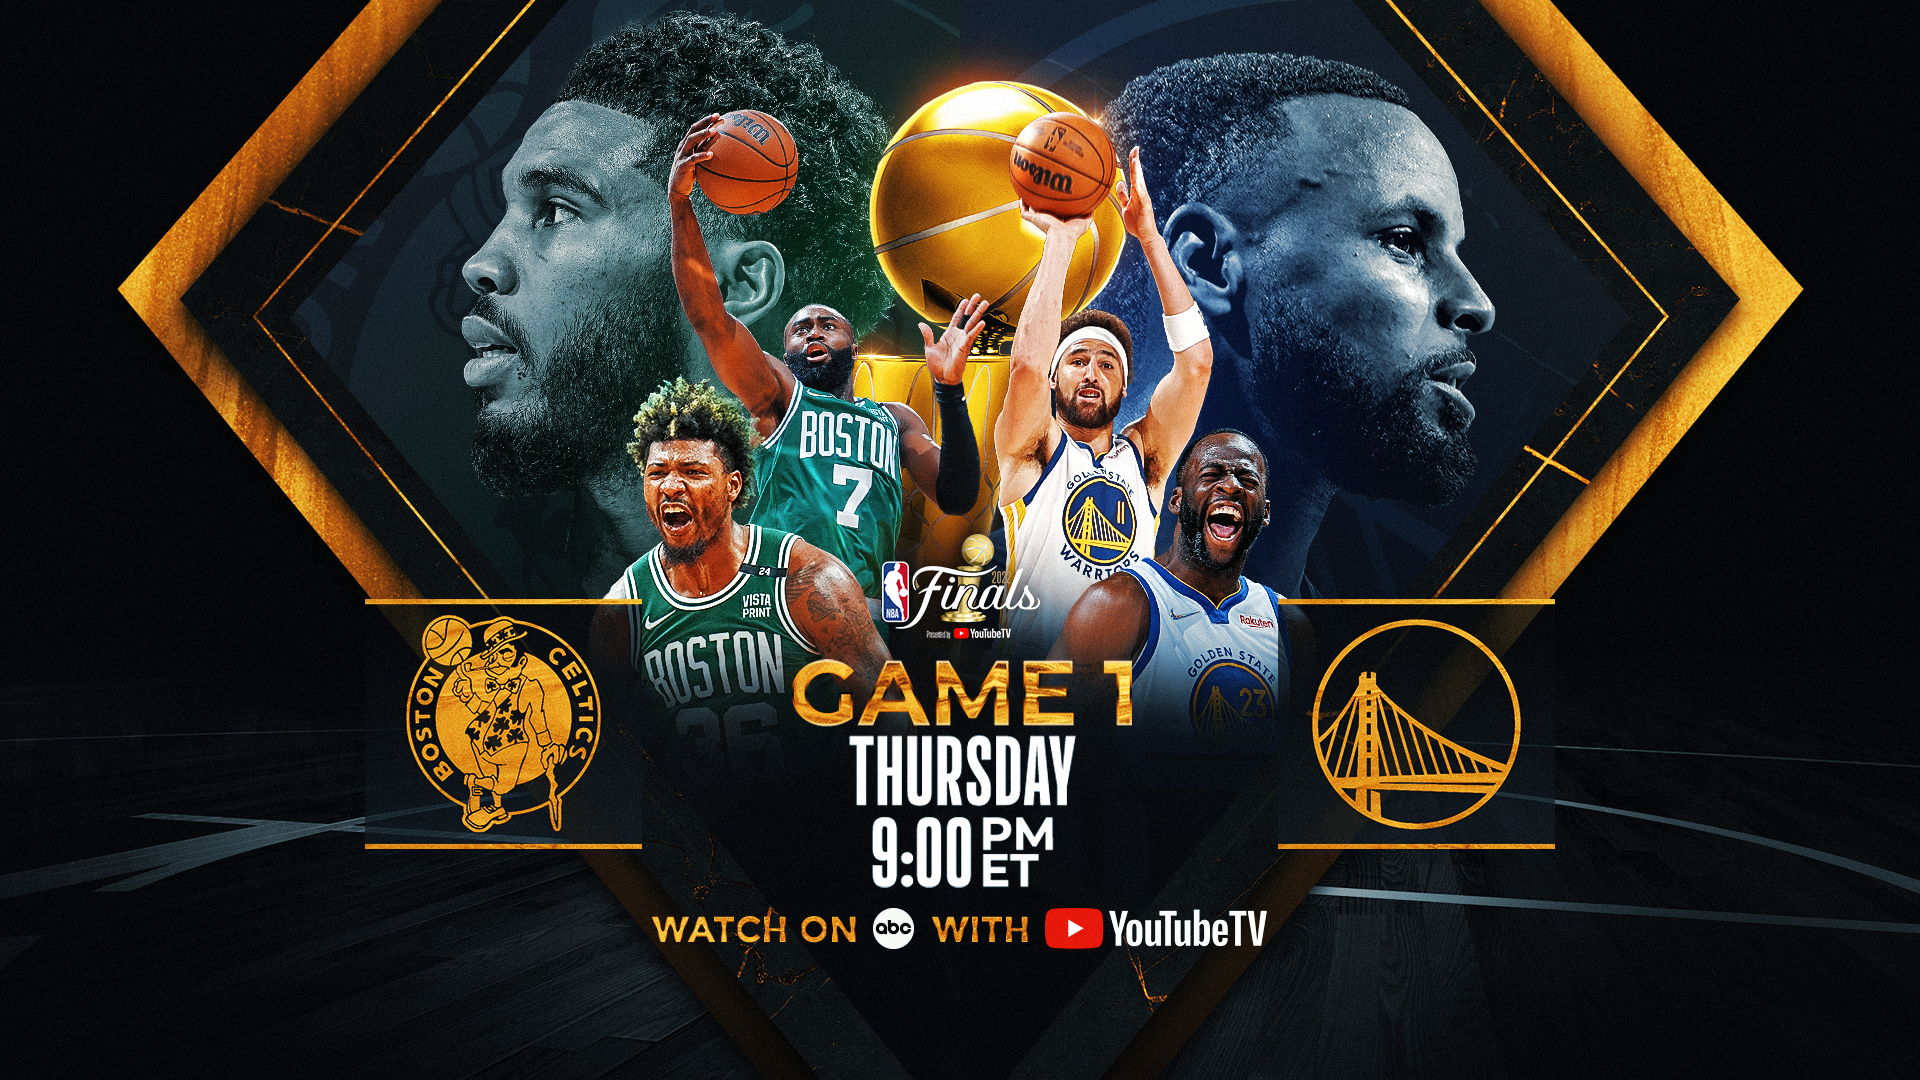 NBA Finals: It\'s the event basketball fans have been waiting for all year - the NBA Finals! Catch all the action and excitement as the best teams in the league battle it out for the championship title. From epic dunks to nail-biting finishes, you won\'t be able to look away. Indulge in the ultimate basketball experience and root for your favorite team!